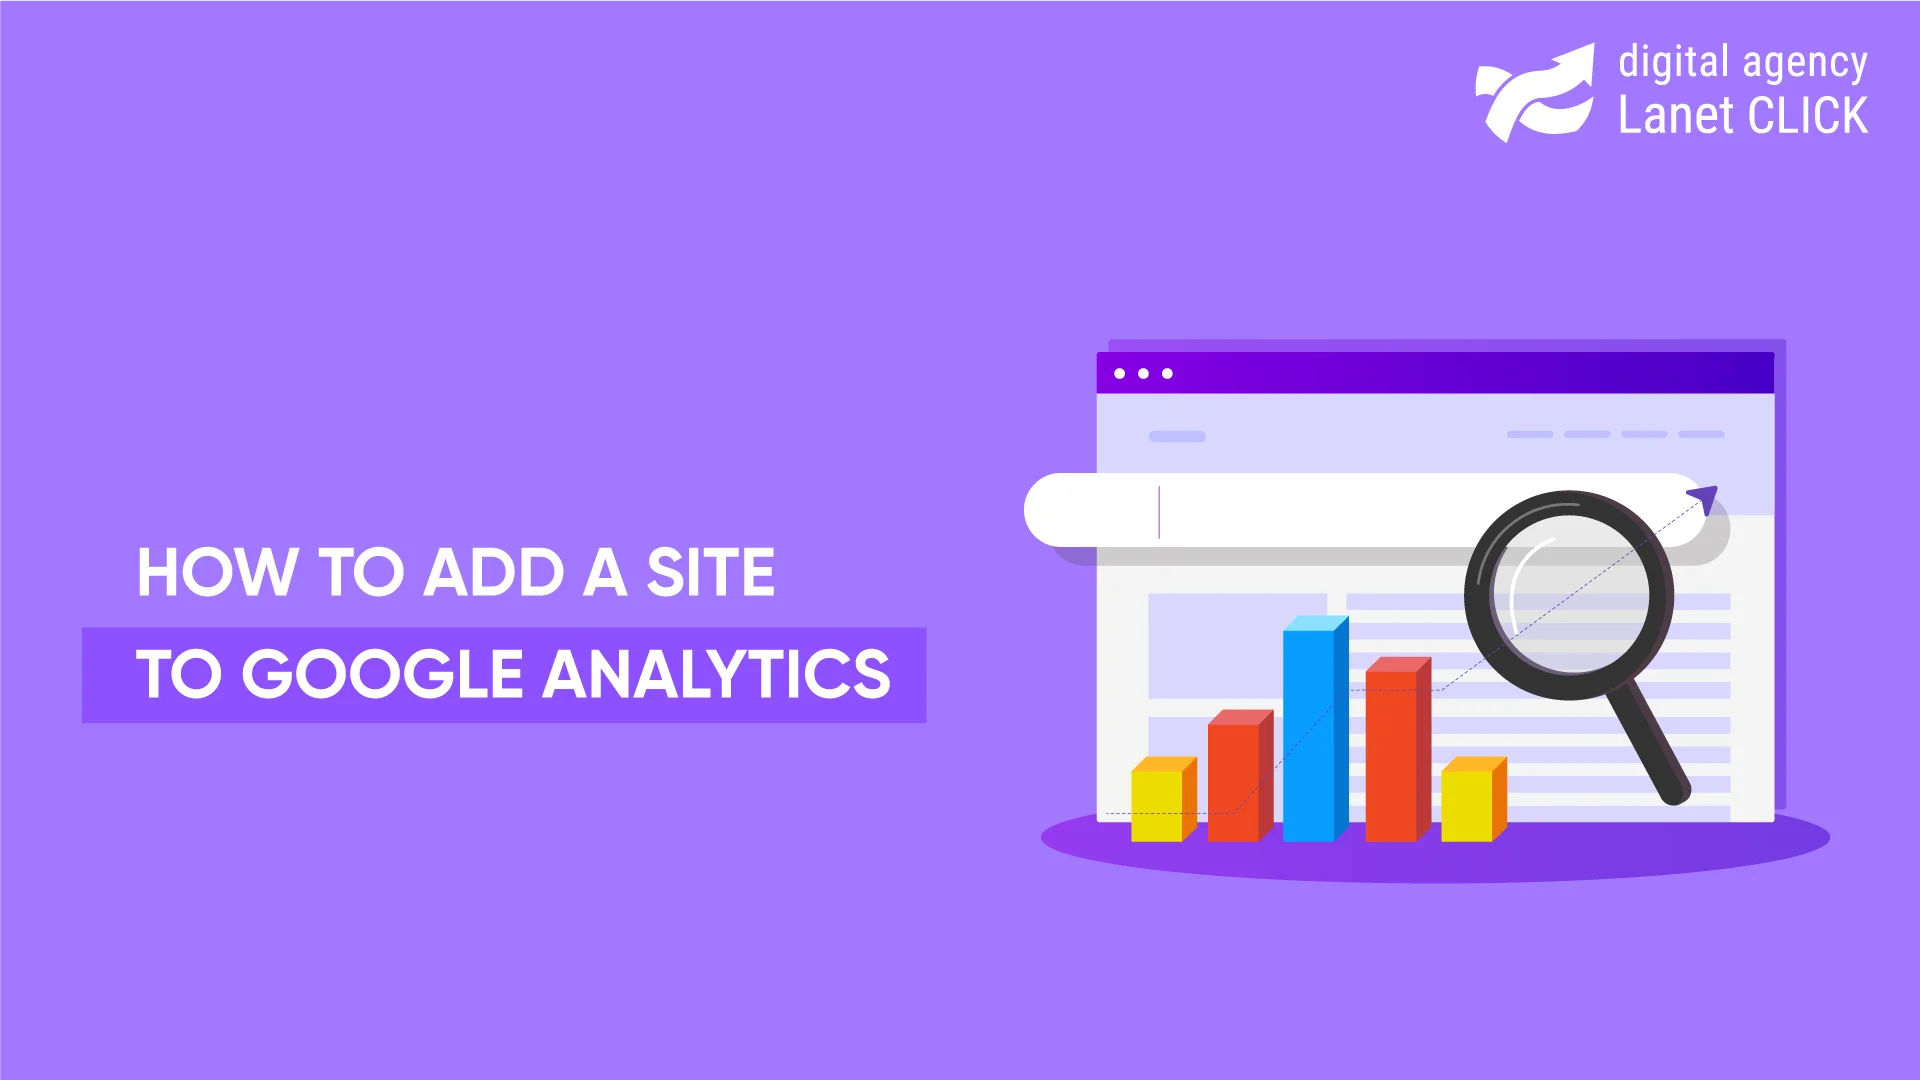 How to add a website to Google Analytics